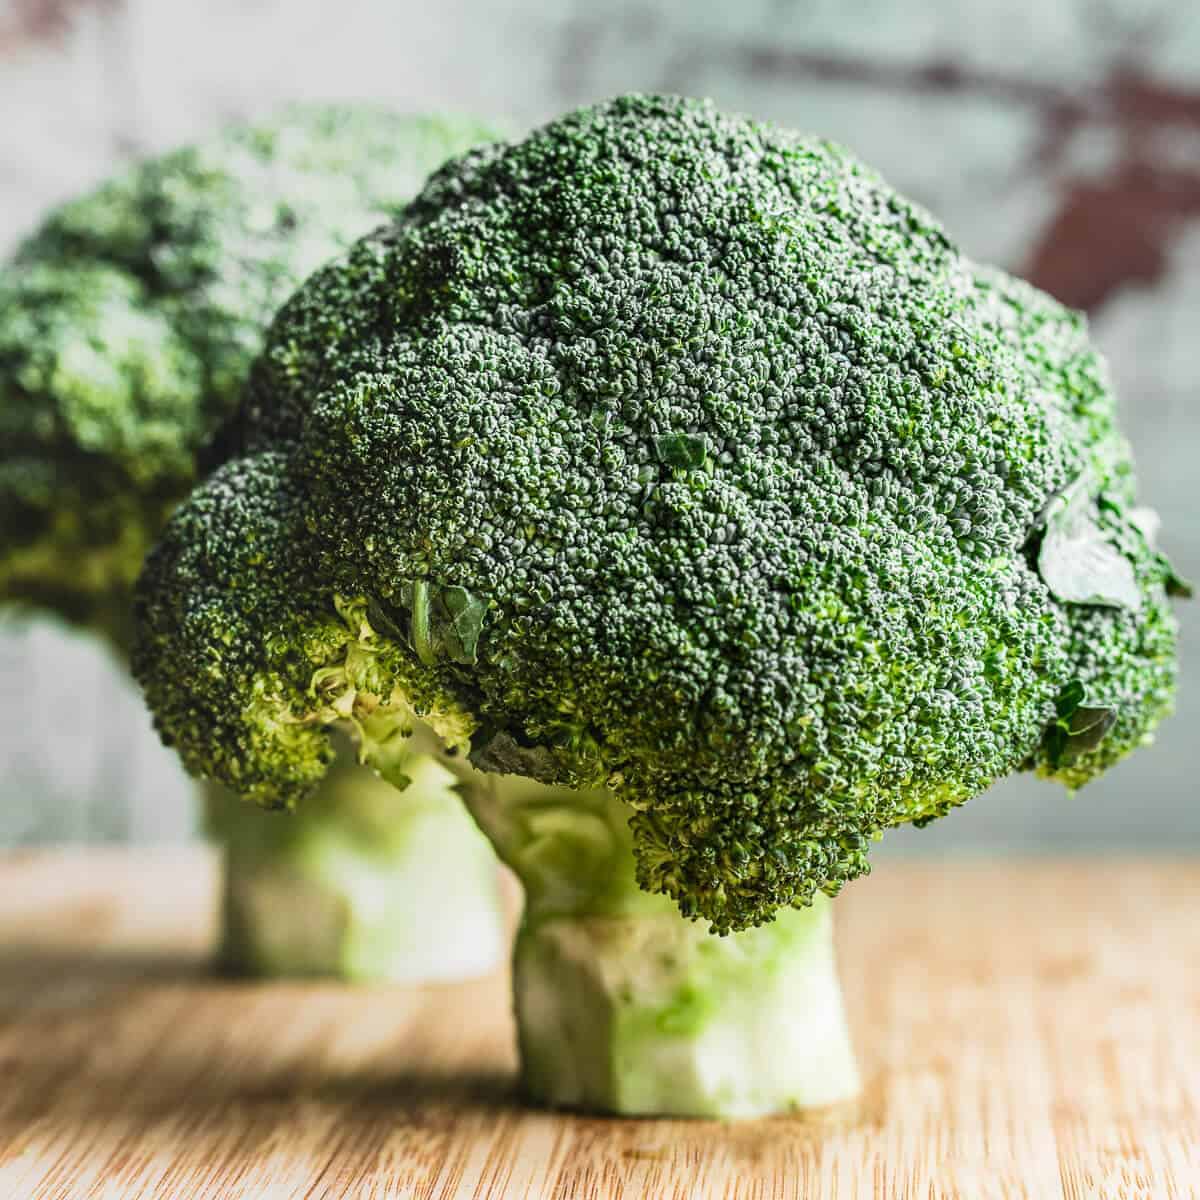 two heads of broccoli on wooden board